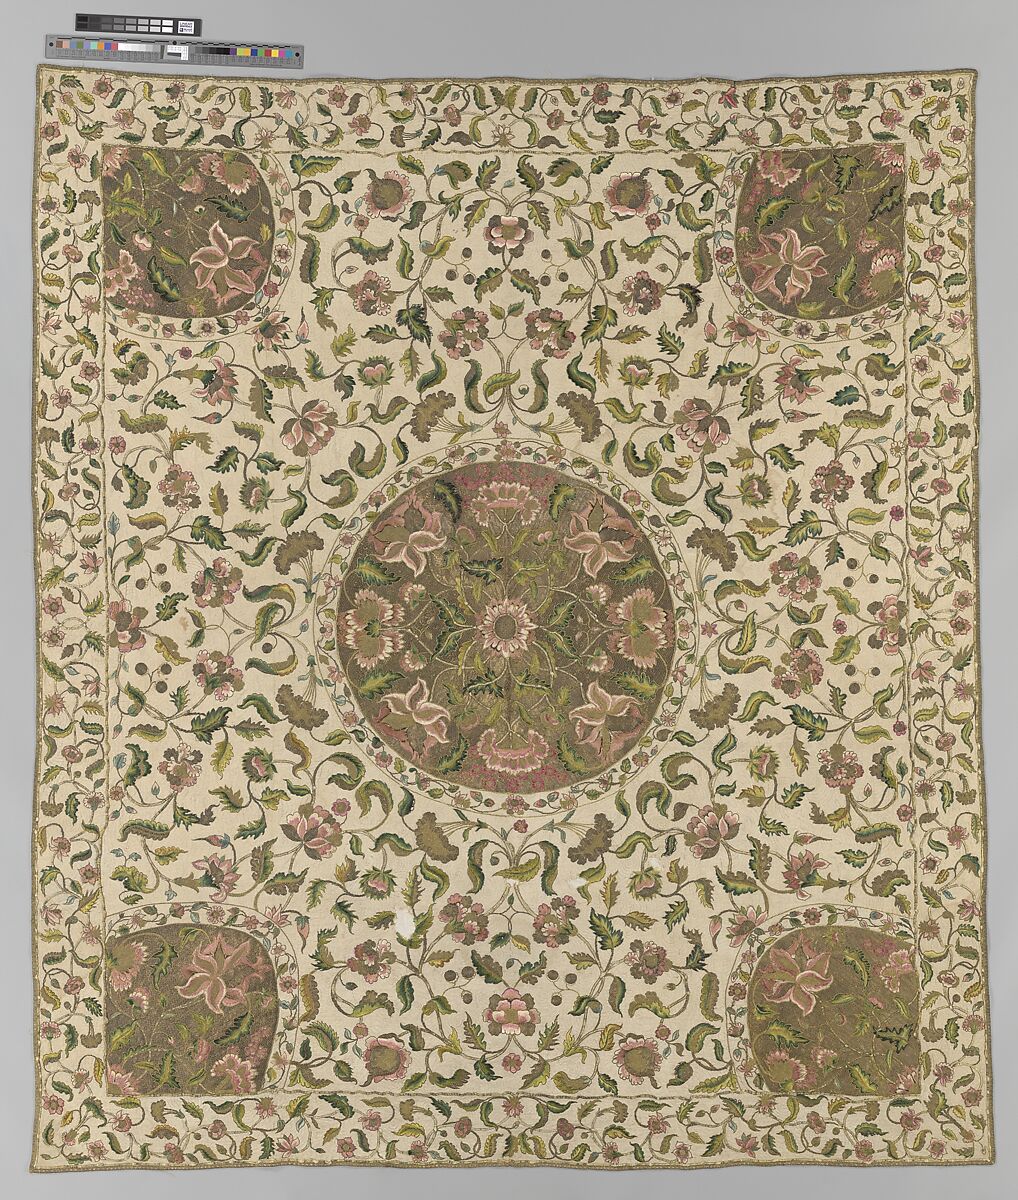 Bedcover, Silk and metal-wrapped thread on linen, British 